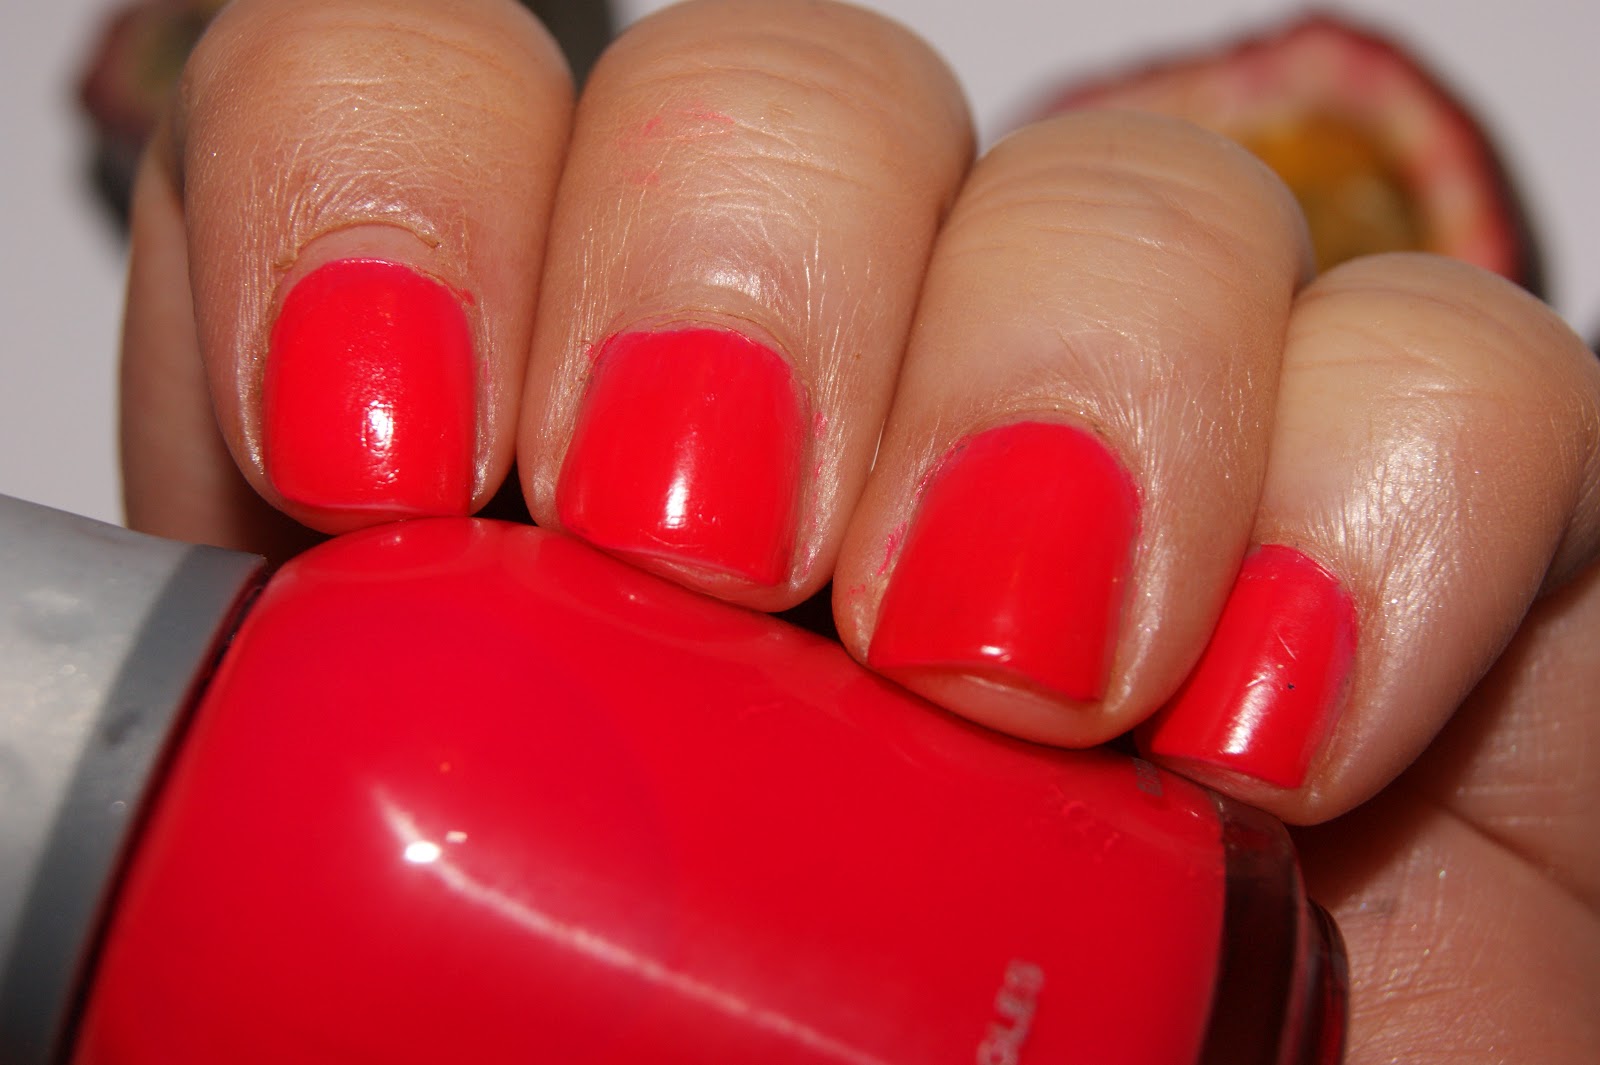 Orly Gel Nail Polish in "Bare Rose" - wide 9